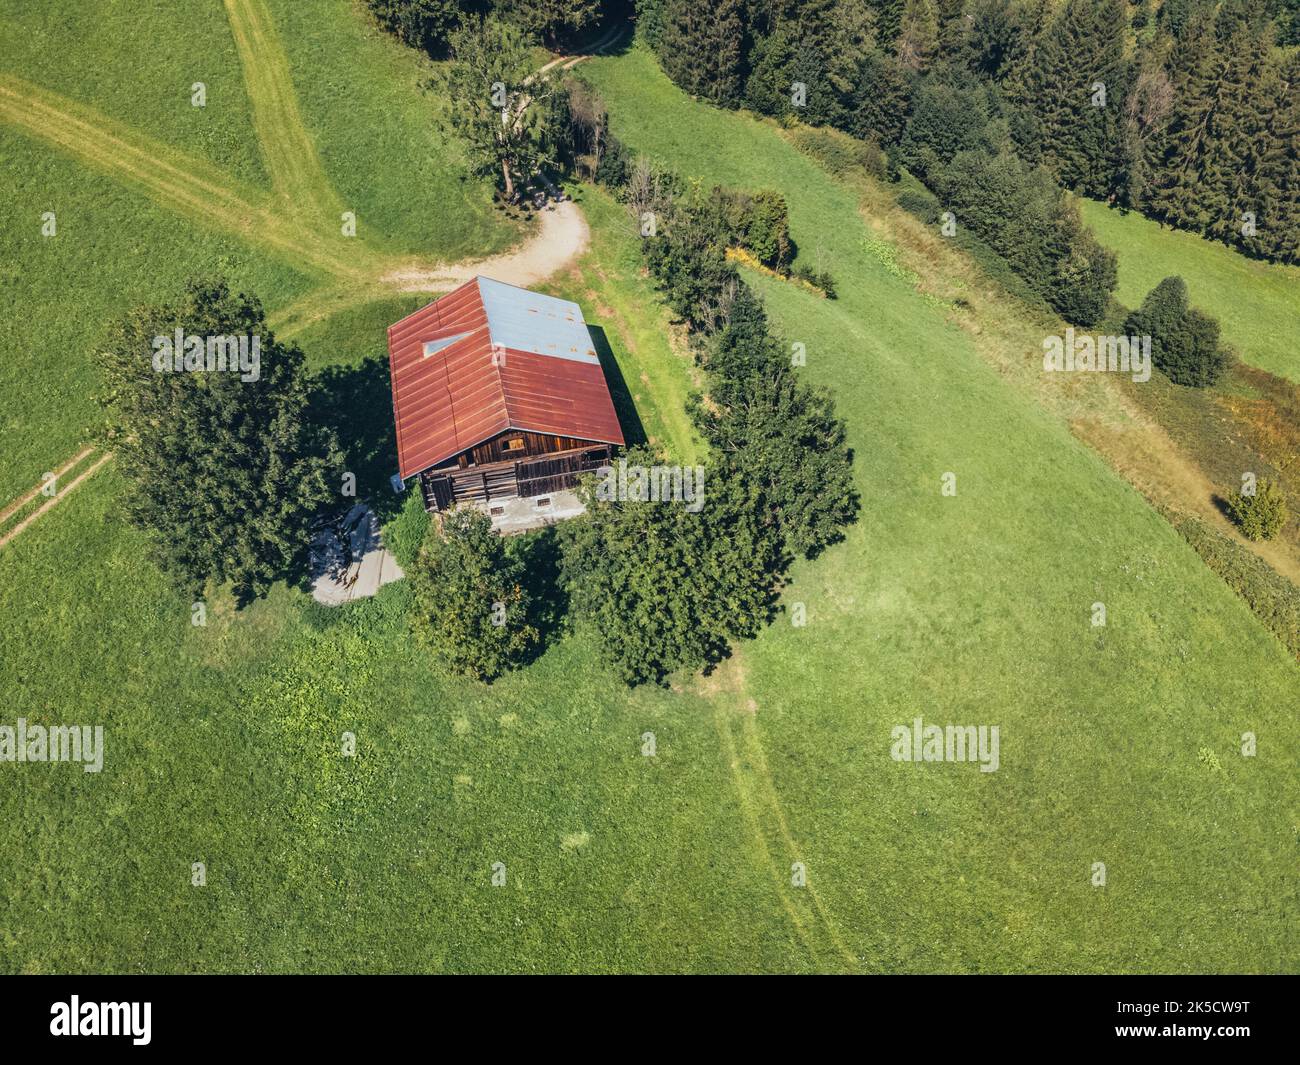 Italy, Veneto, province of Belluno, Santo Stefano di Cadore, Campolongo. Rural building, trees and well-kept green lawn, elevated view Stock Photo